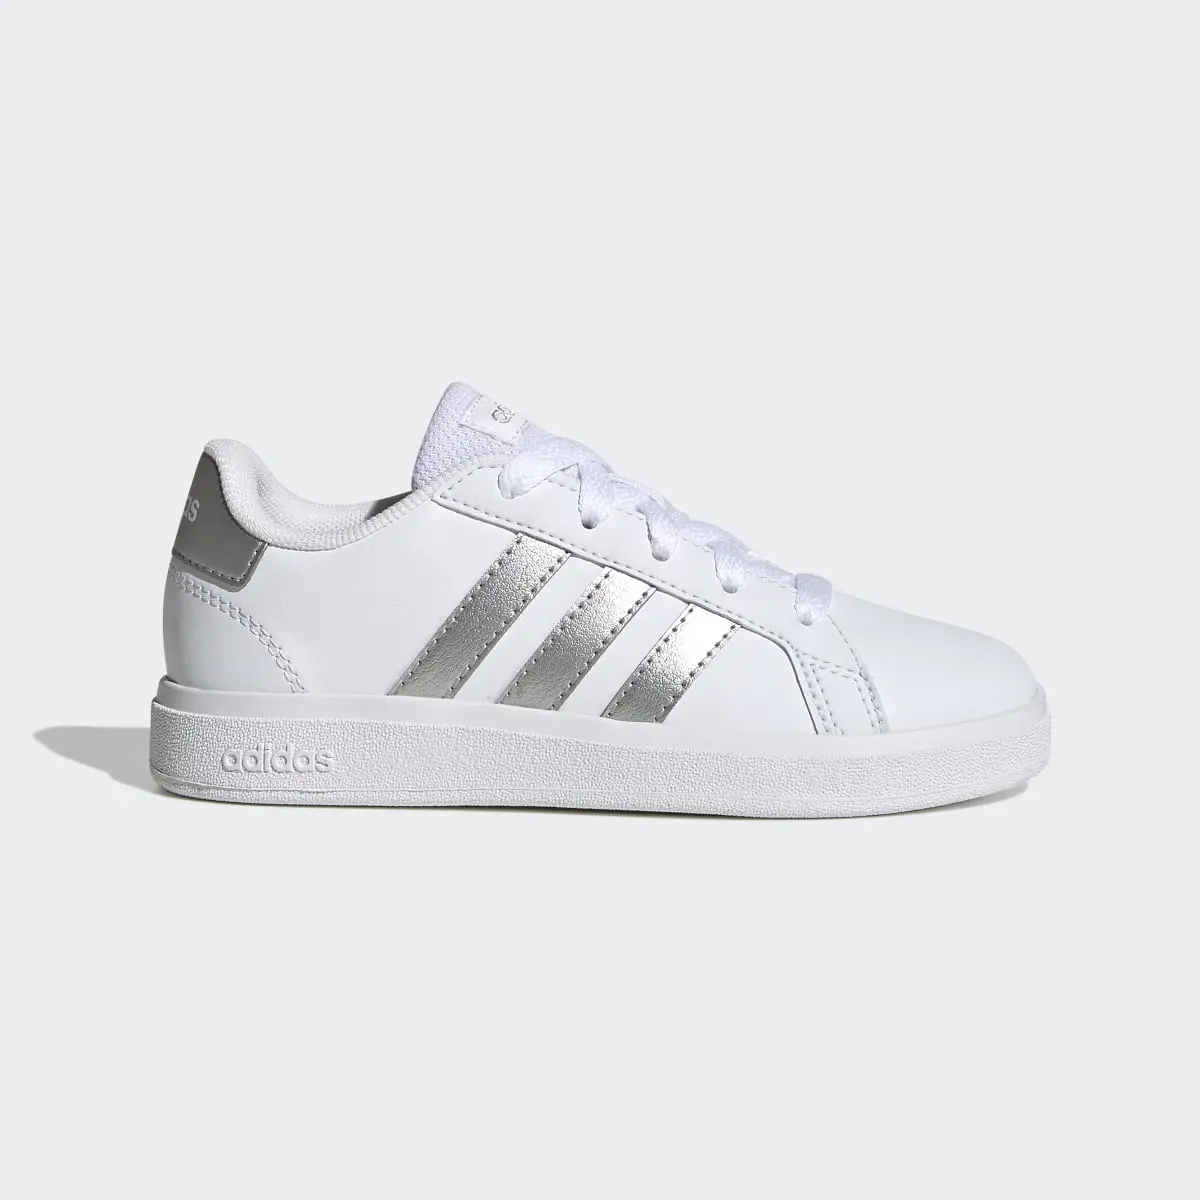 Adidas Buty Grand Court Lifestyle Tennis Lace-Up. 2